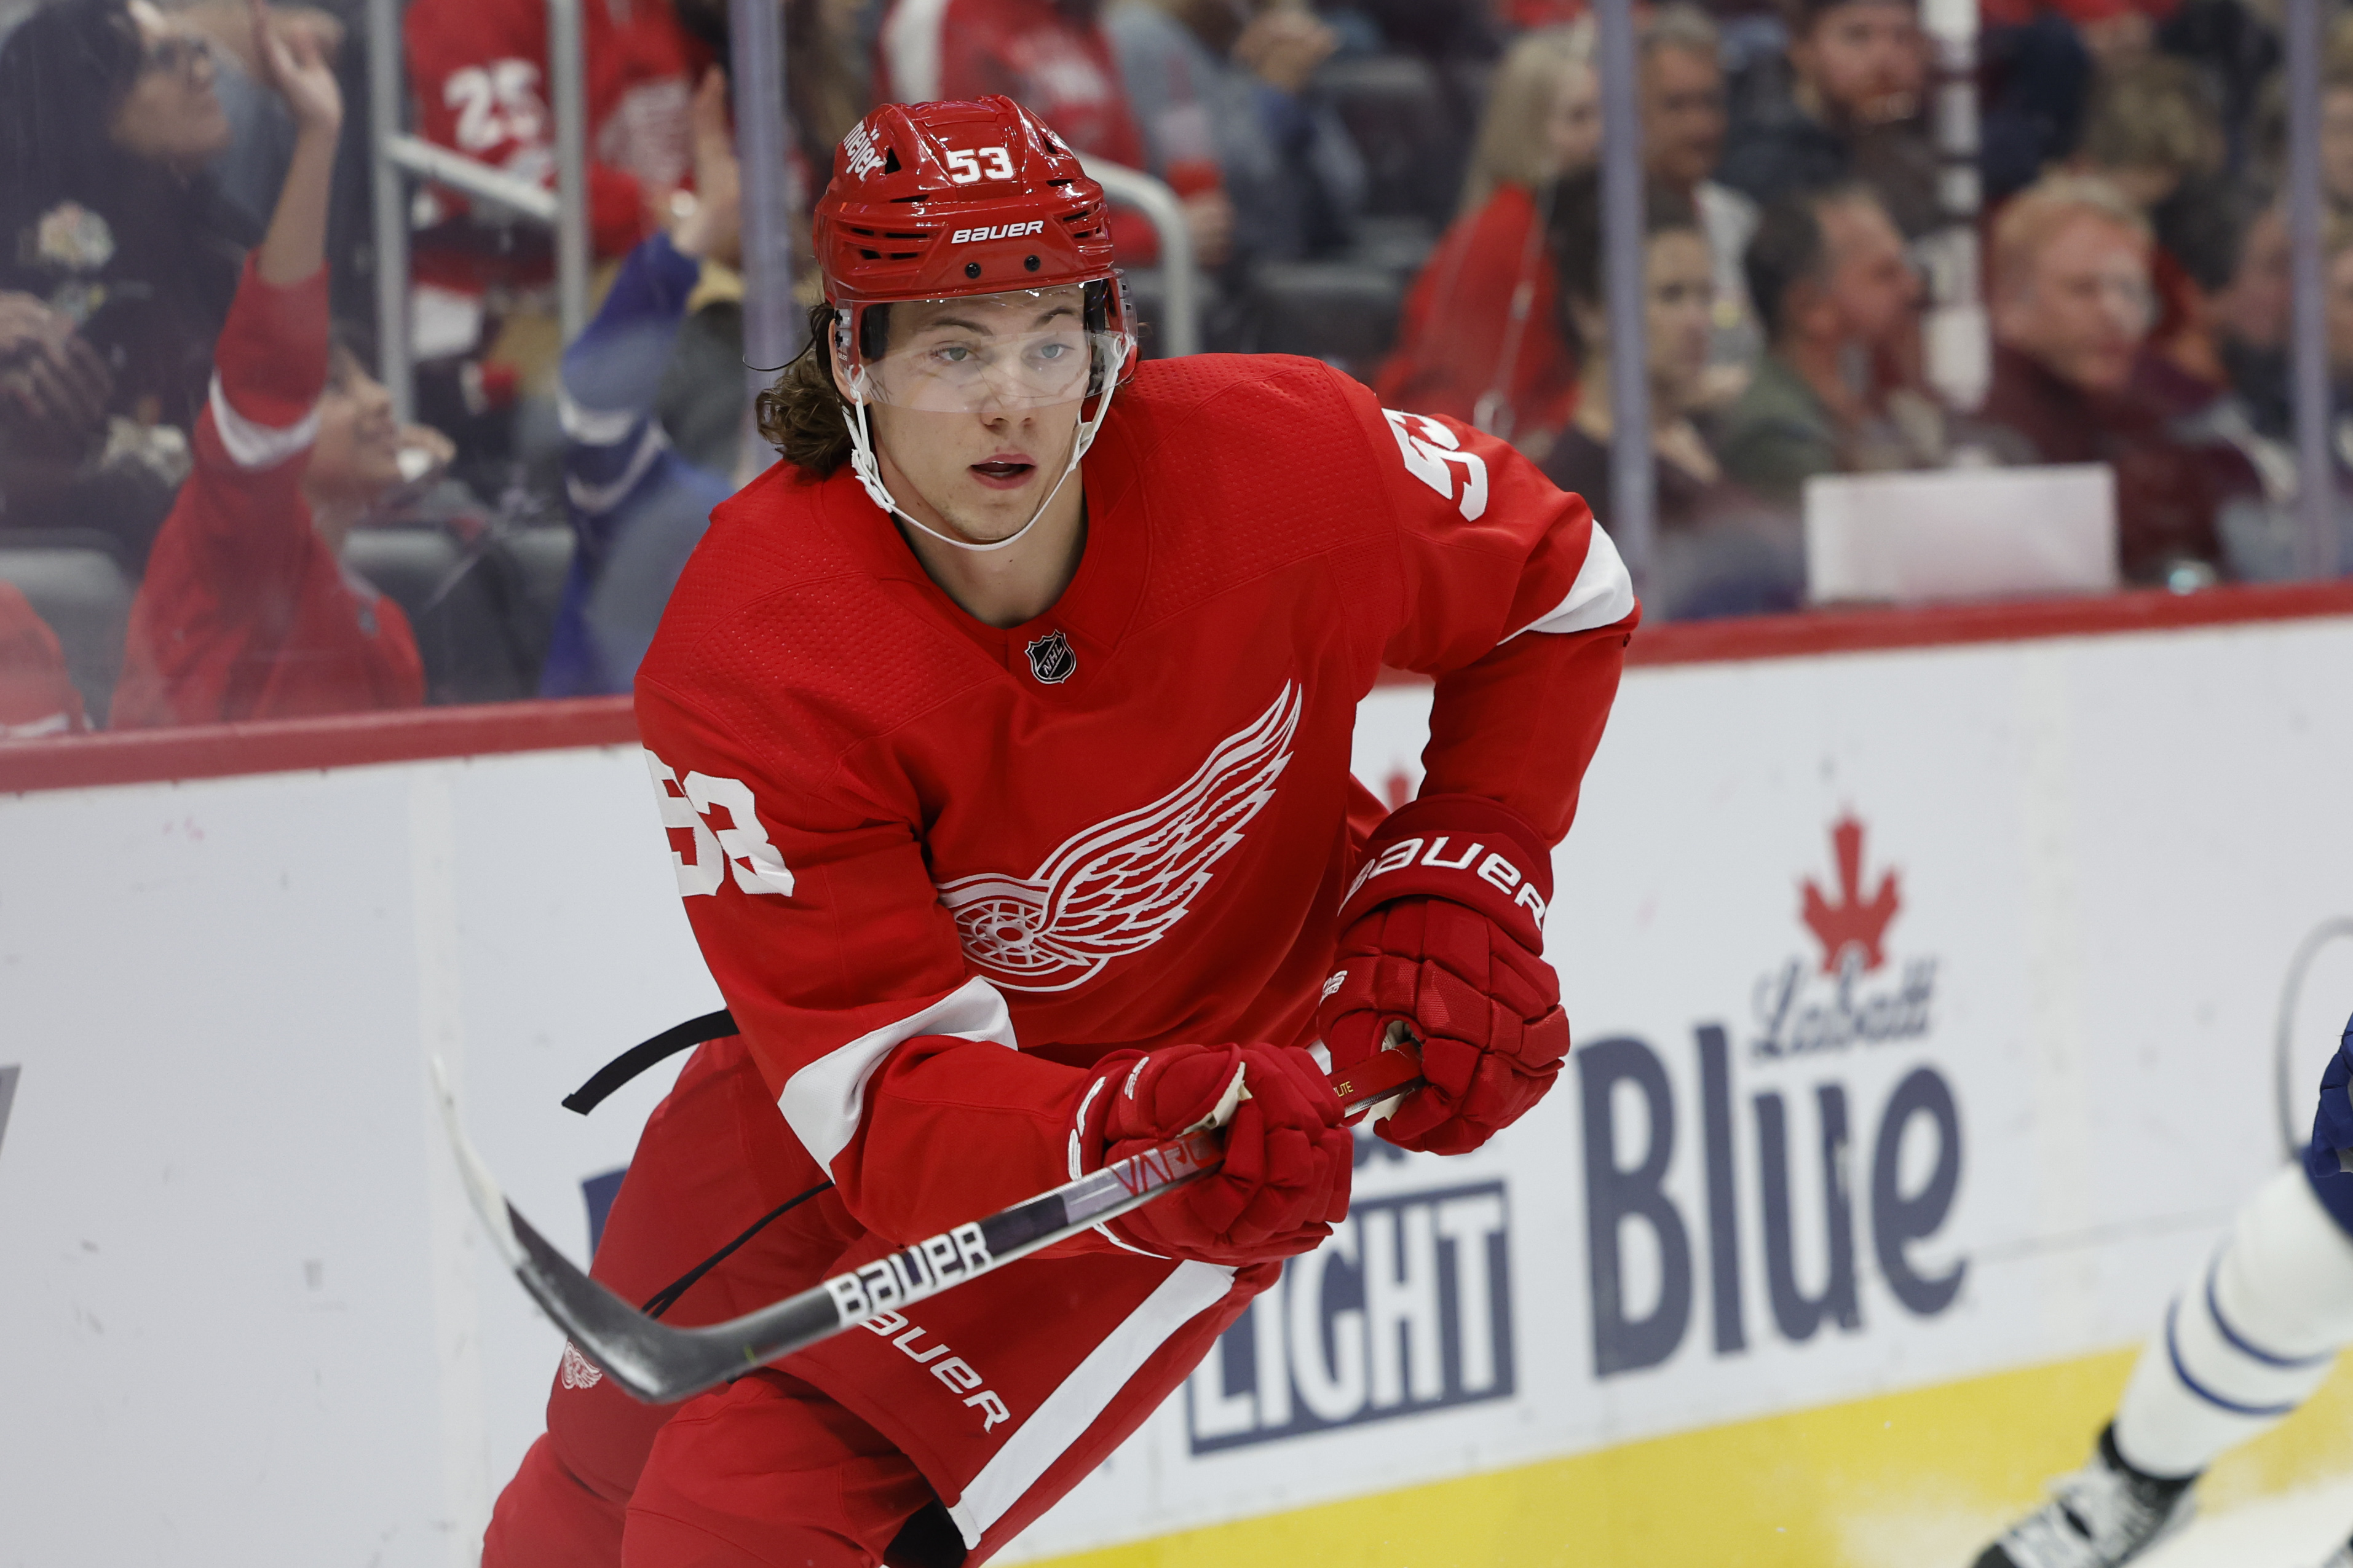 Detroit Red Wings: MORITZ SEIDER IS THE NHL'S ROOKIE OF THE YEAR